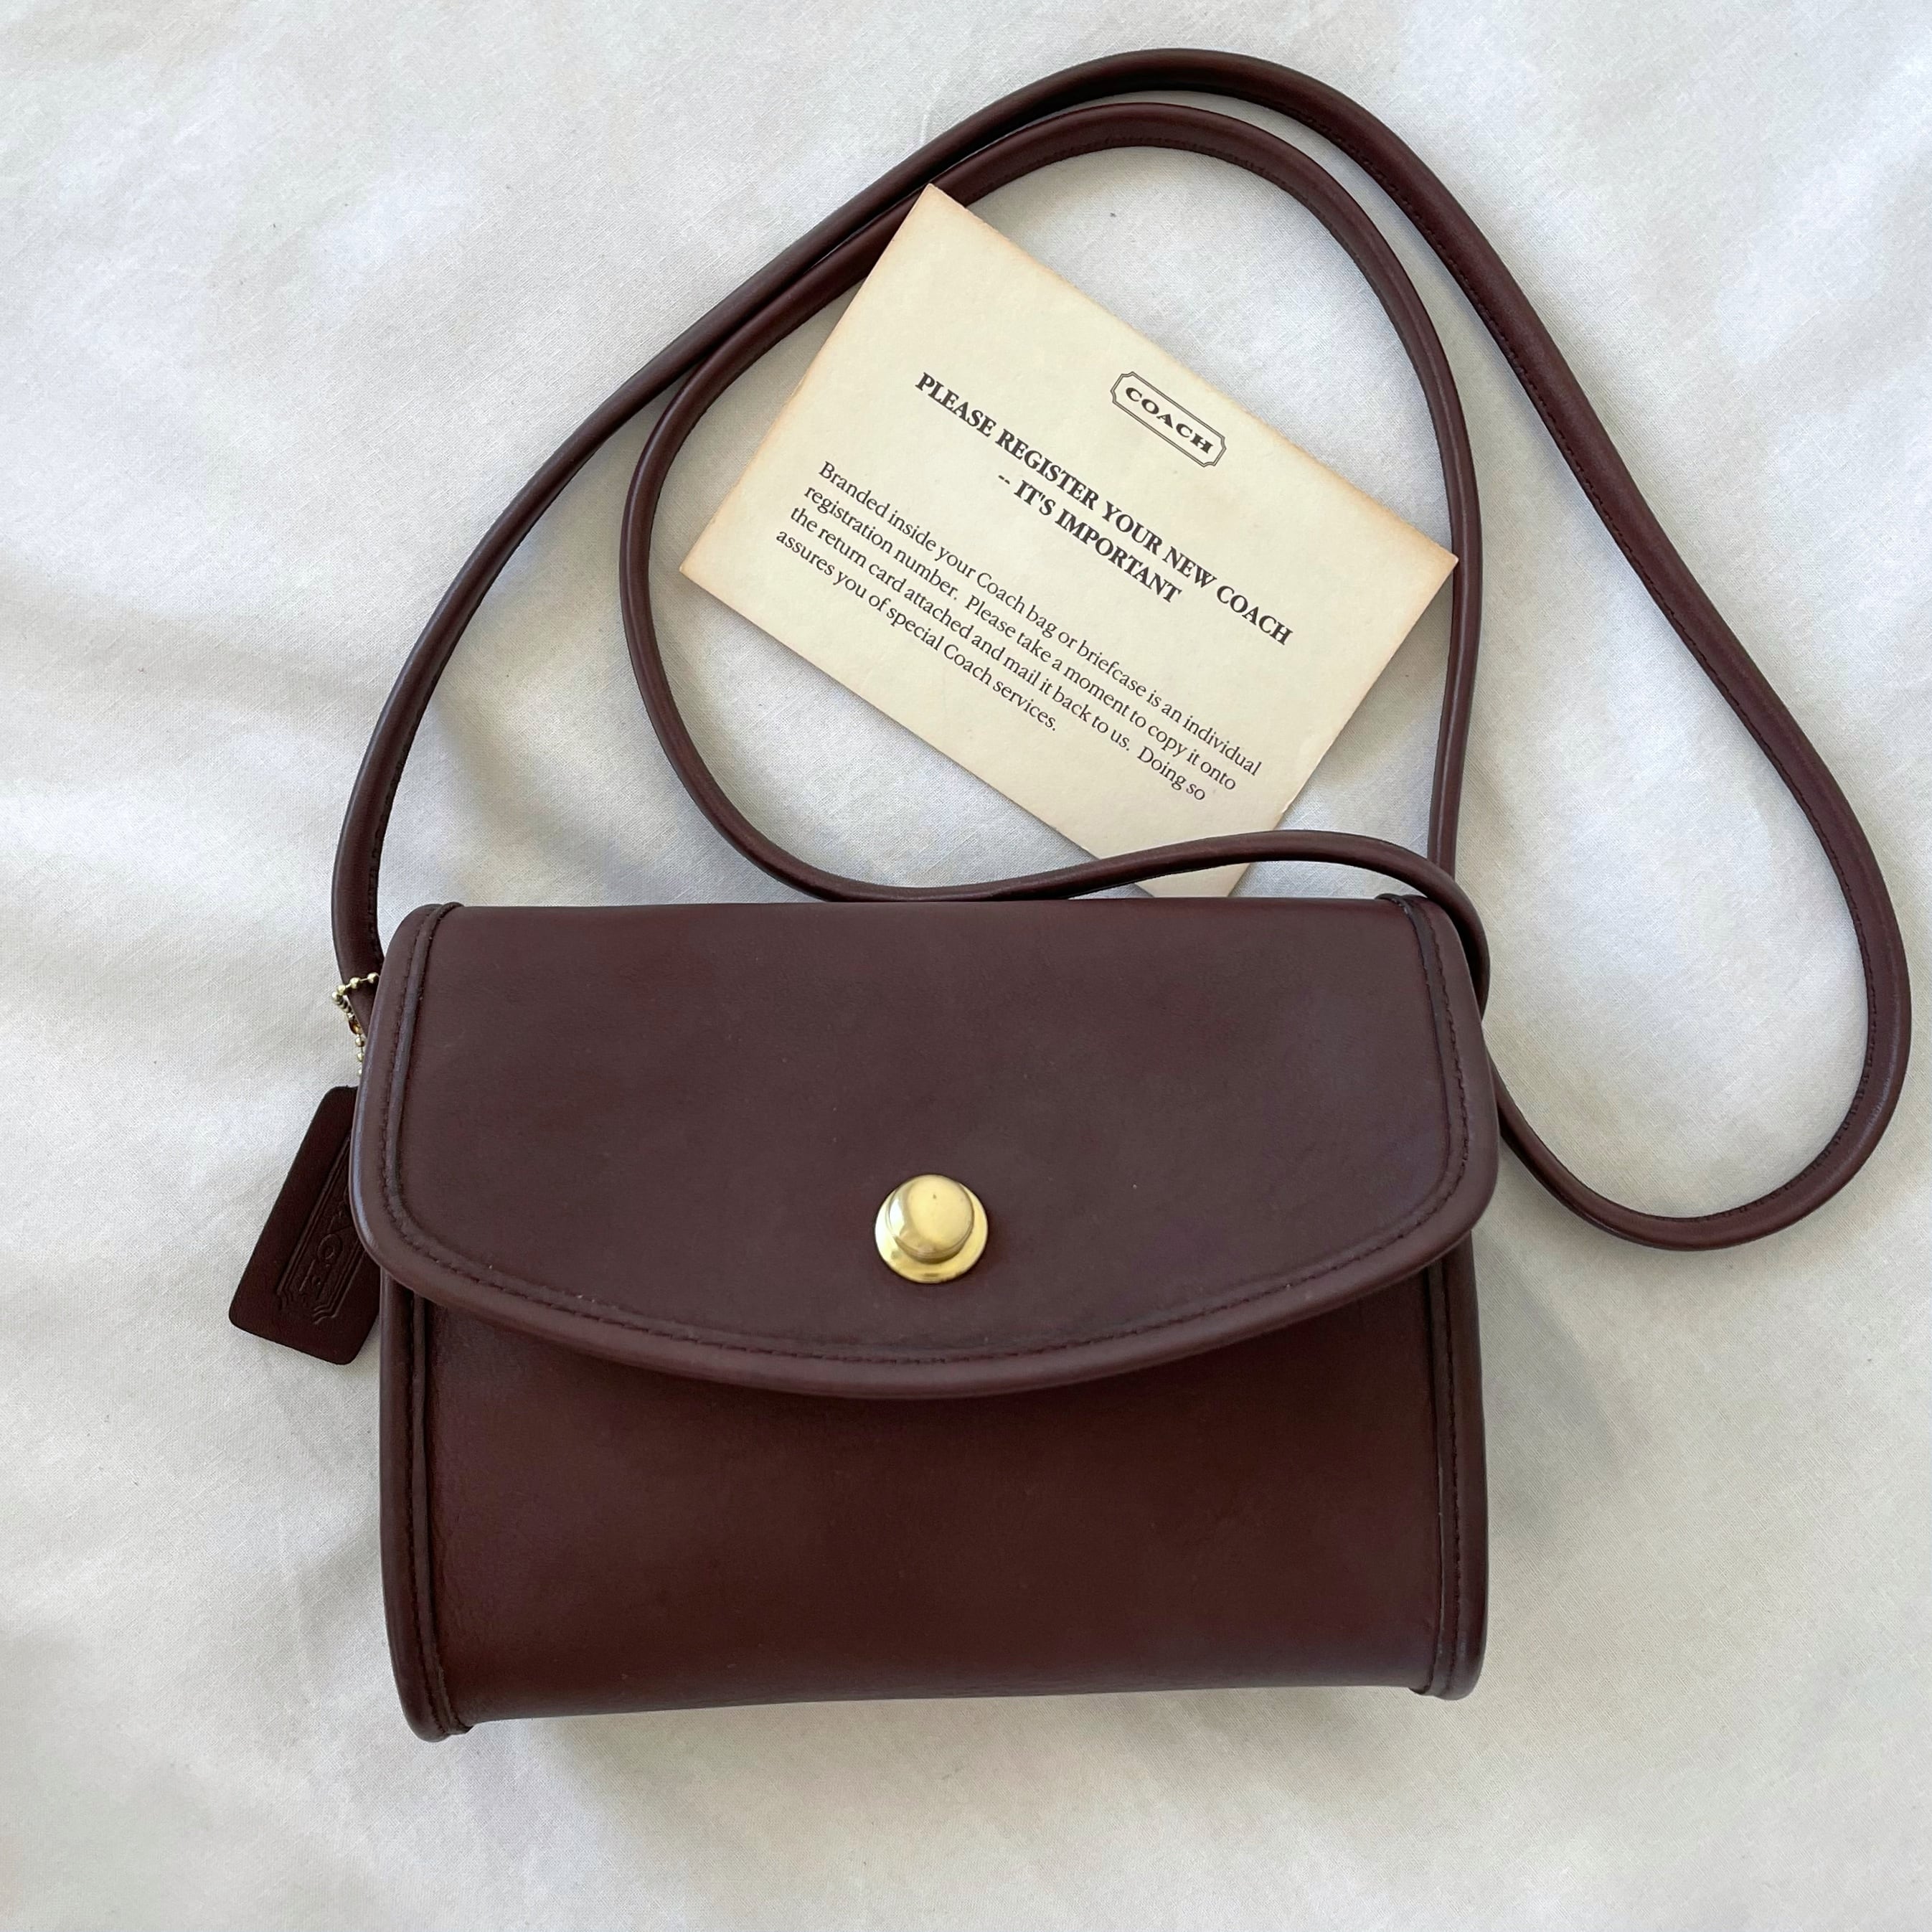 RARE VINTAGE COACH (OLD COACH) CHRYSTIE BAG IN MAHOGANY